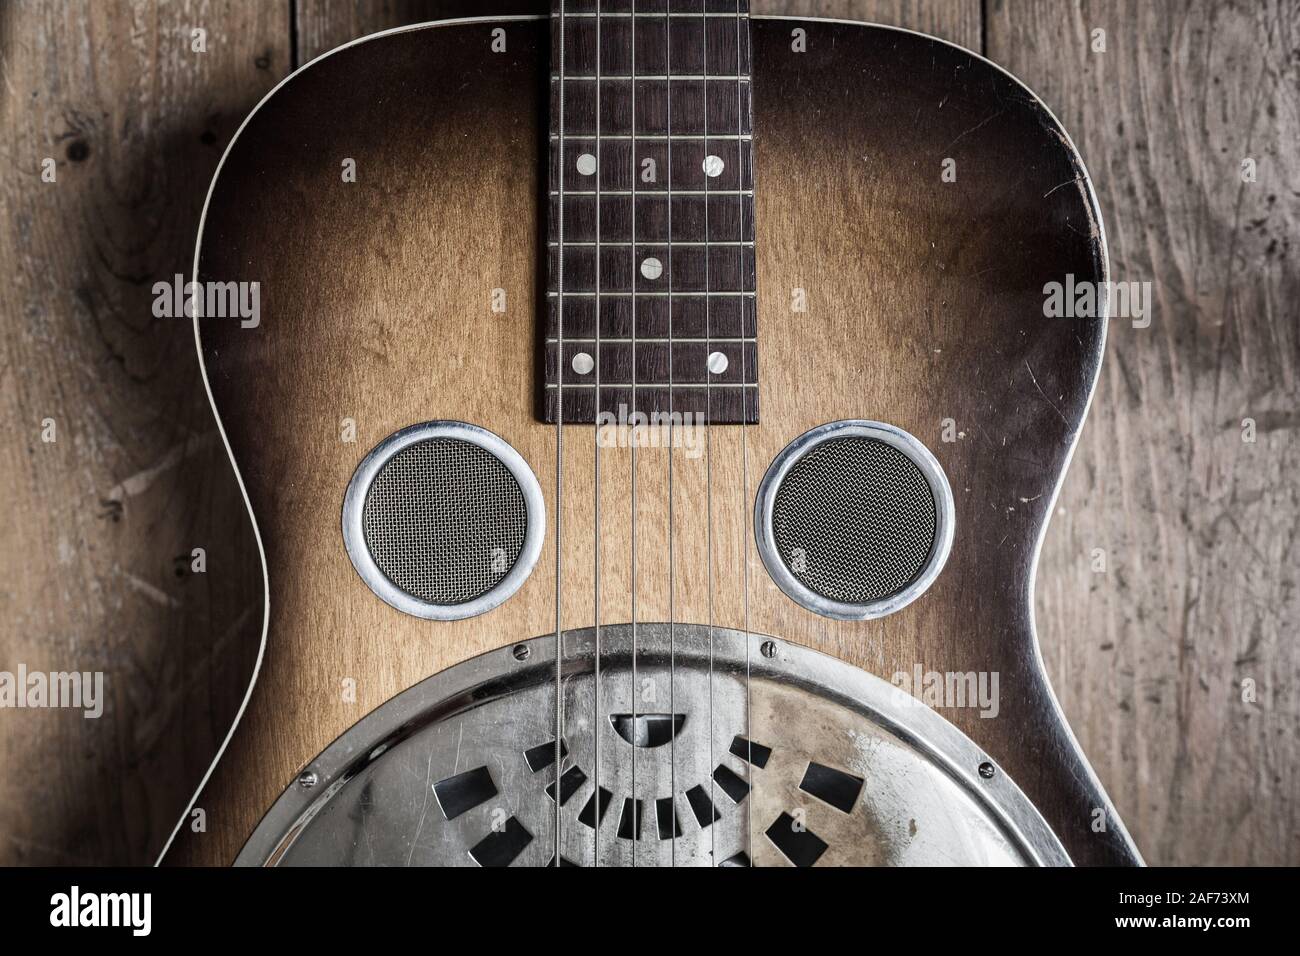 A Dobro guitar on a wooden background Stock Photo